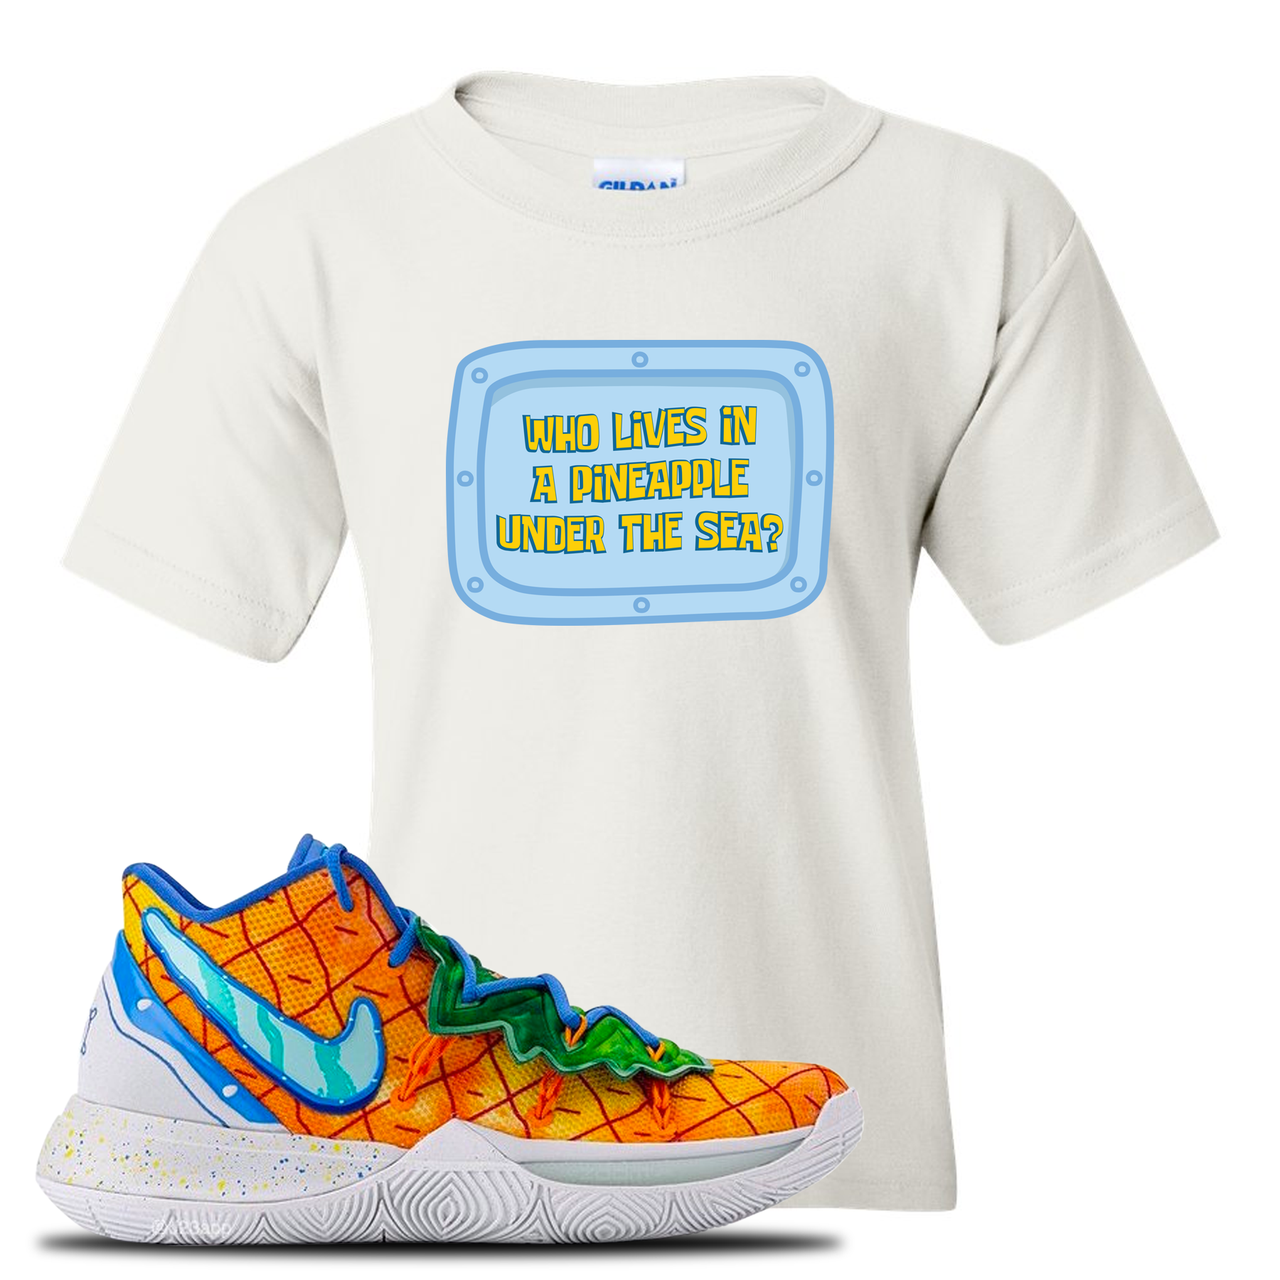 Kyrie 5 Pineapple House Who Lives in a Pineapple Under the Sea? White Sneaker Hook Up Kid's T-Shirt